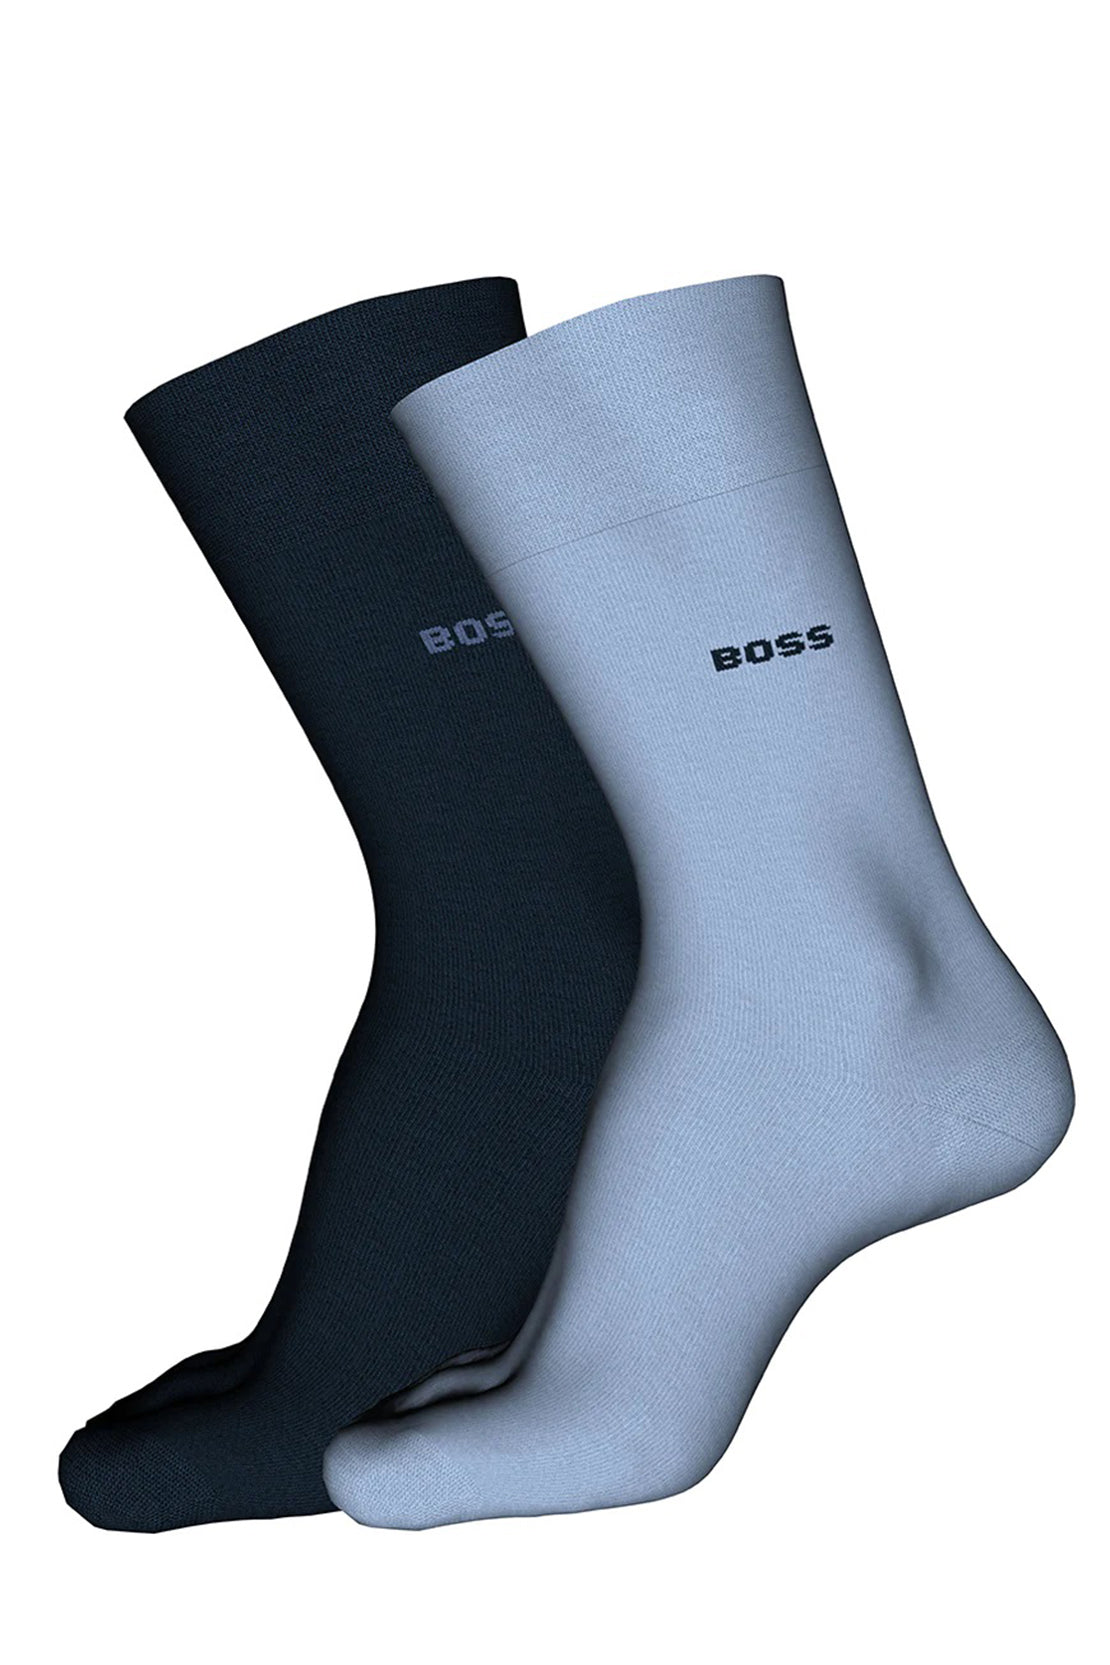 BOSS - 2 Pack Of Bamboo Touch Socks in Stretch Yarns in Light Pastel Blue 50491196 451